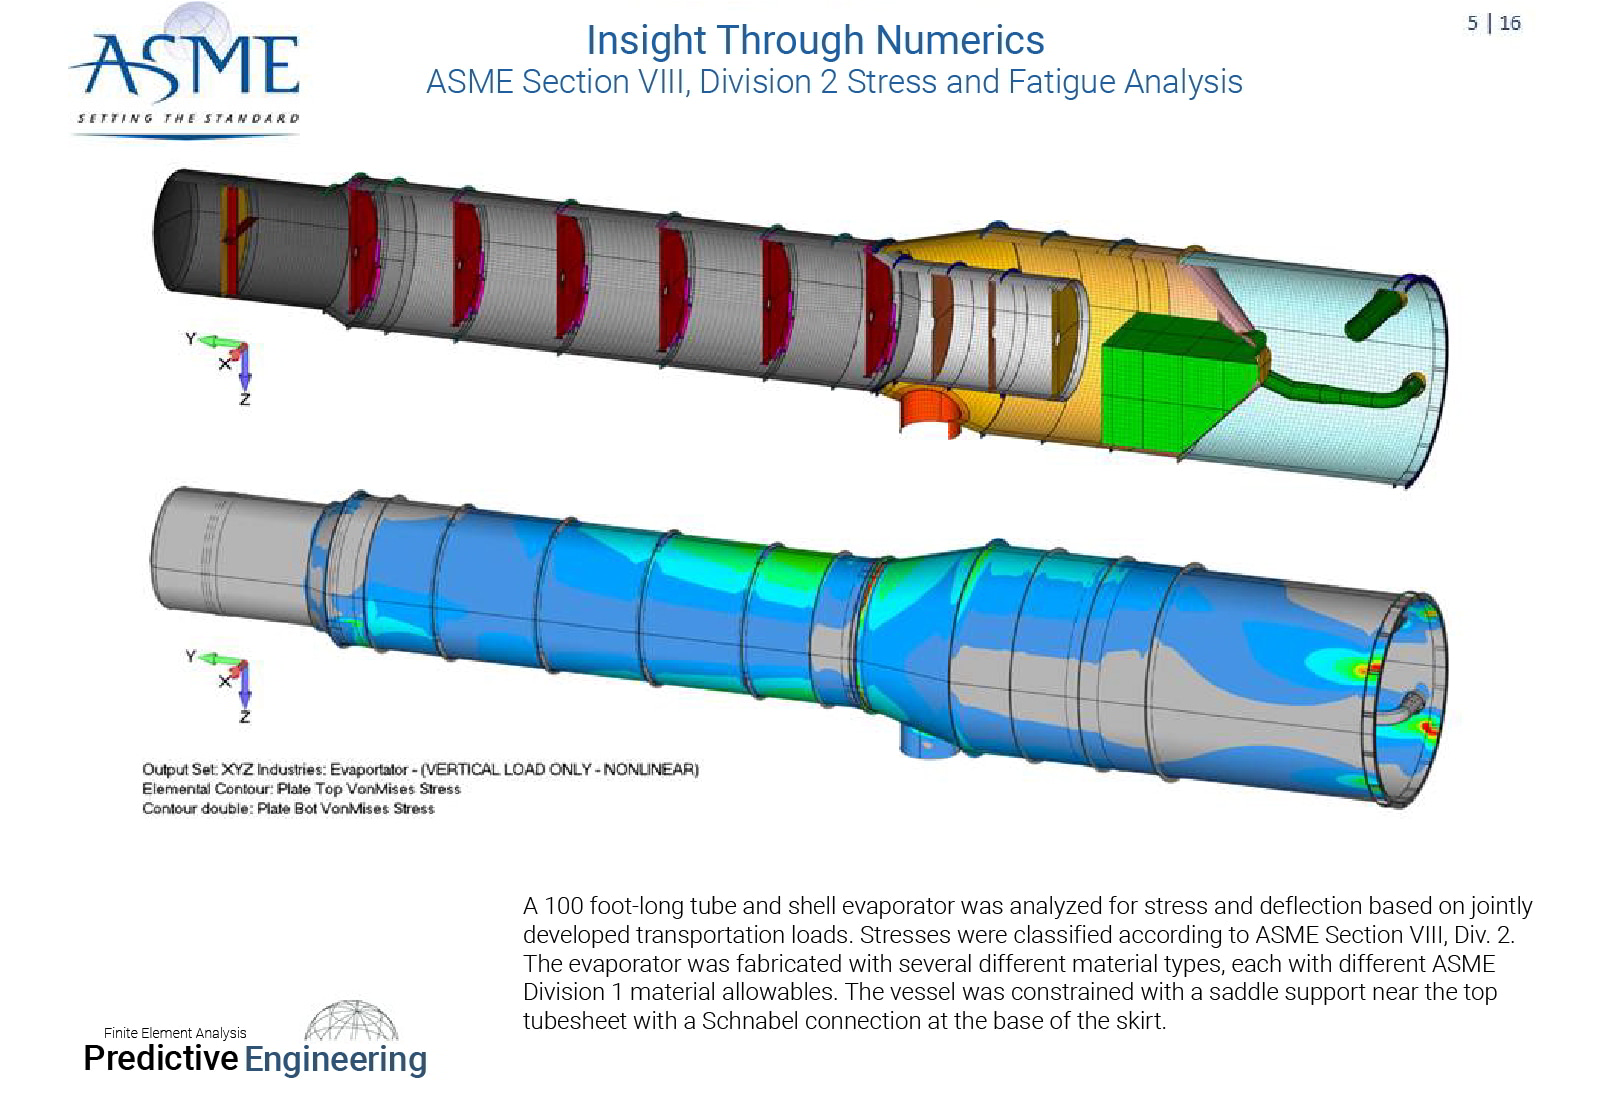 A 100 foot-long tube and shell evaporator was analyzed for stress and deflection based on jointly developed transportation loads - Predictive Engineering ASME BPVC Pressure Vessel Consulting Services